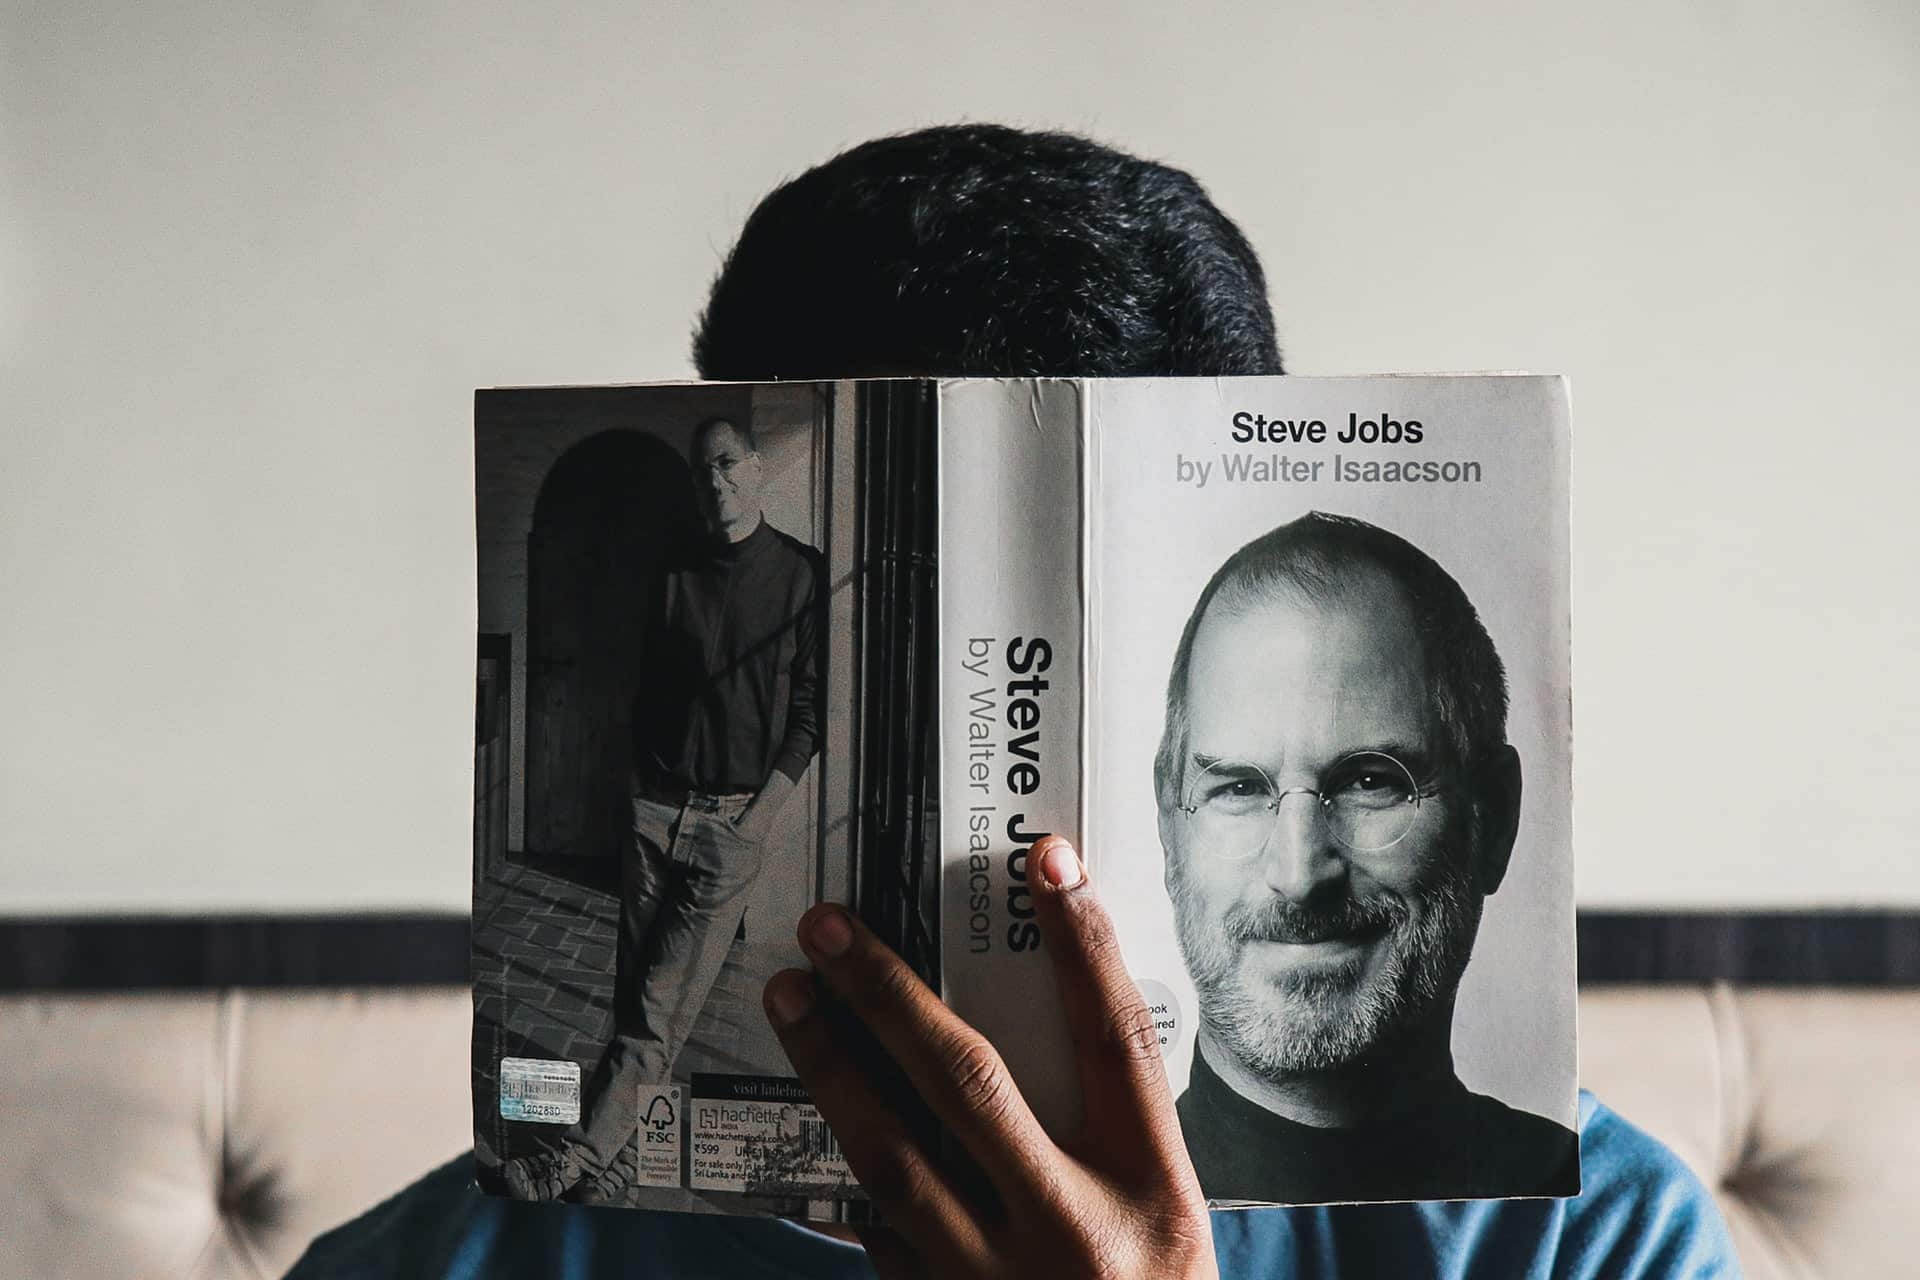 A man reads a book. We see on the cover of the book Steve Jobs.